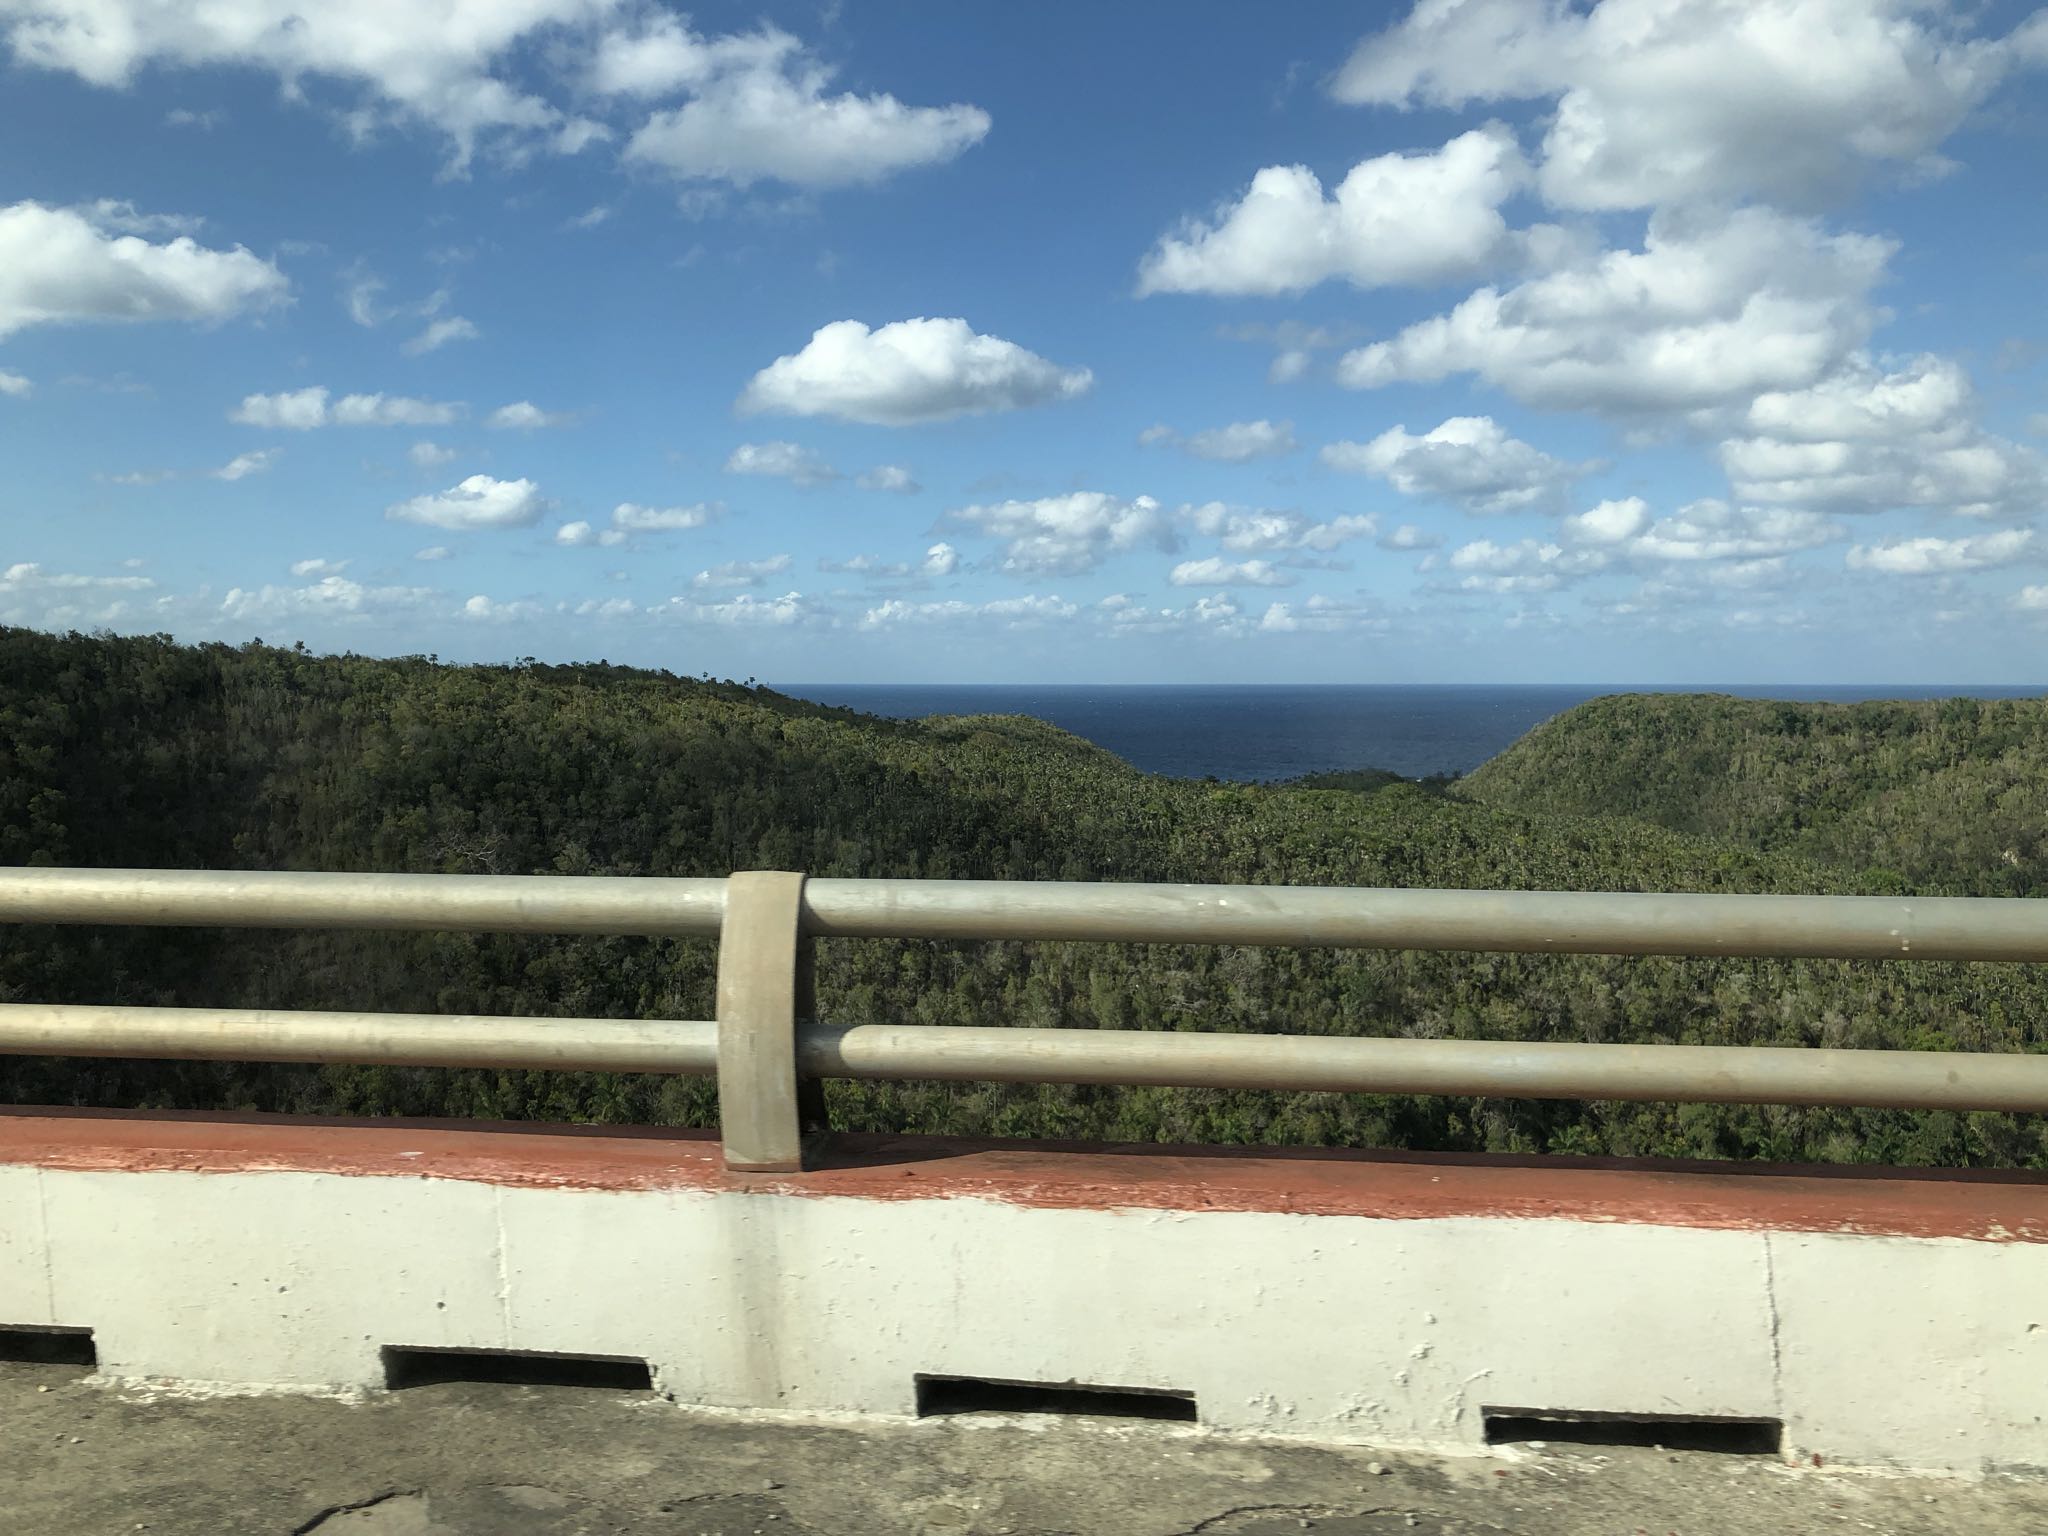 Photo 215 of 221 from the album Highlights Cuba 2019.